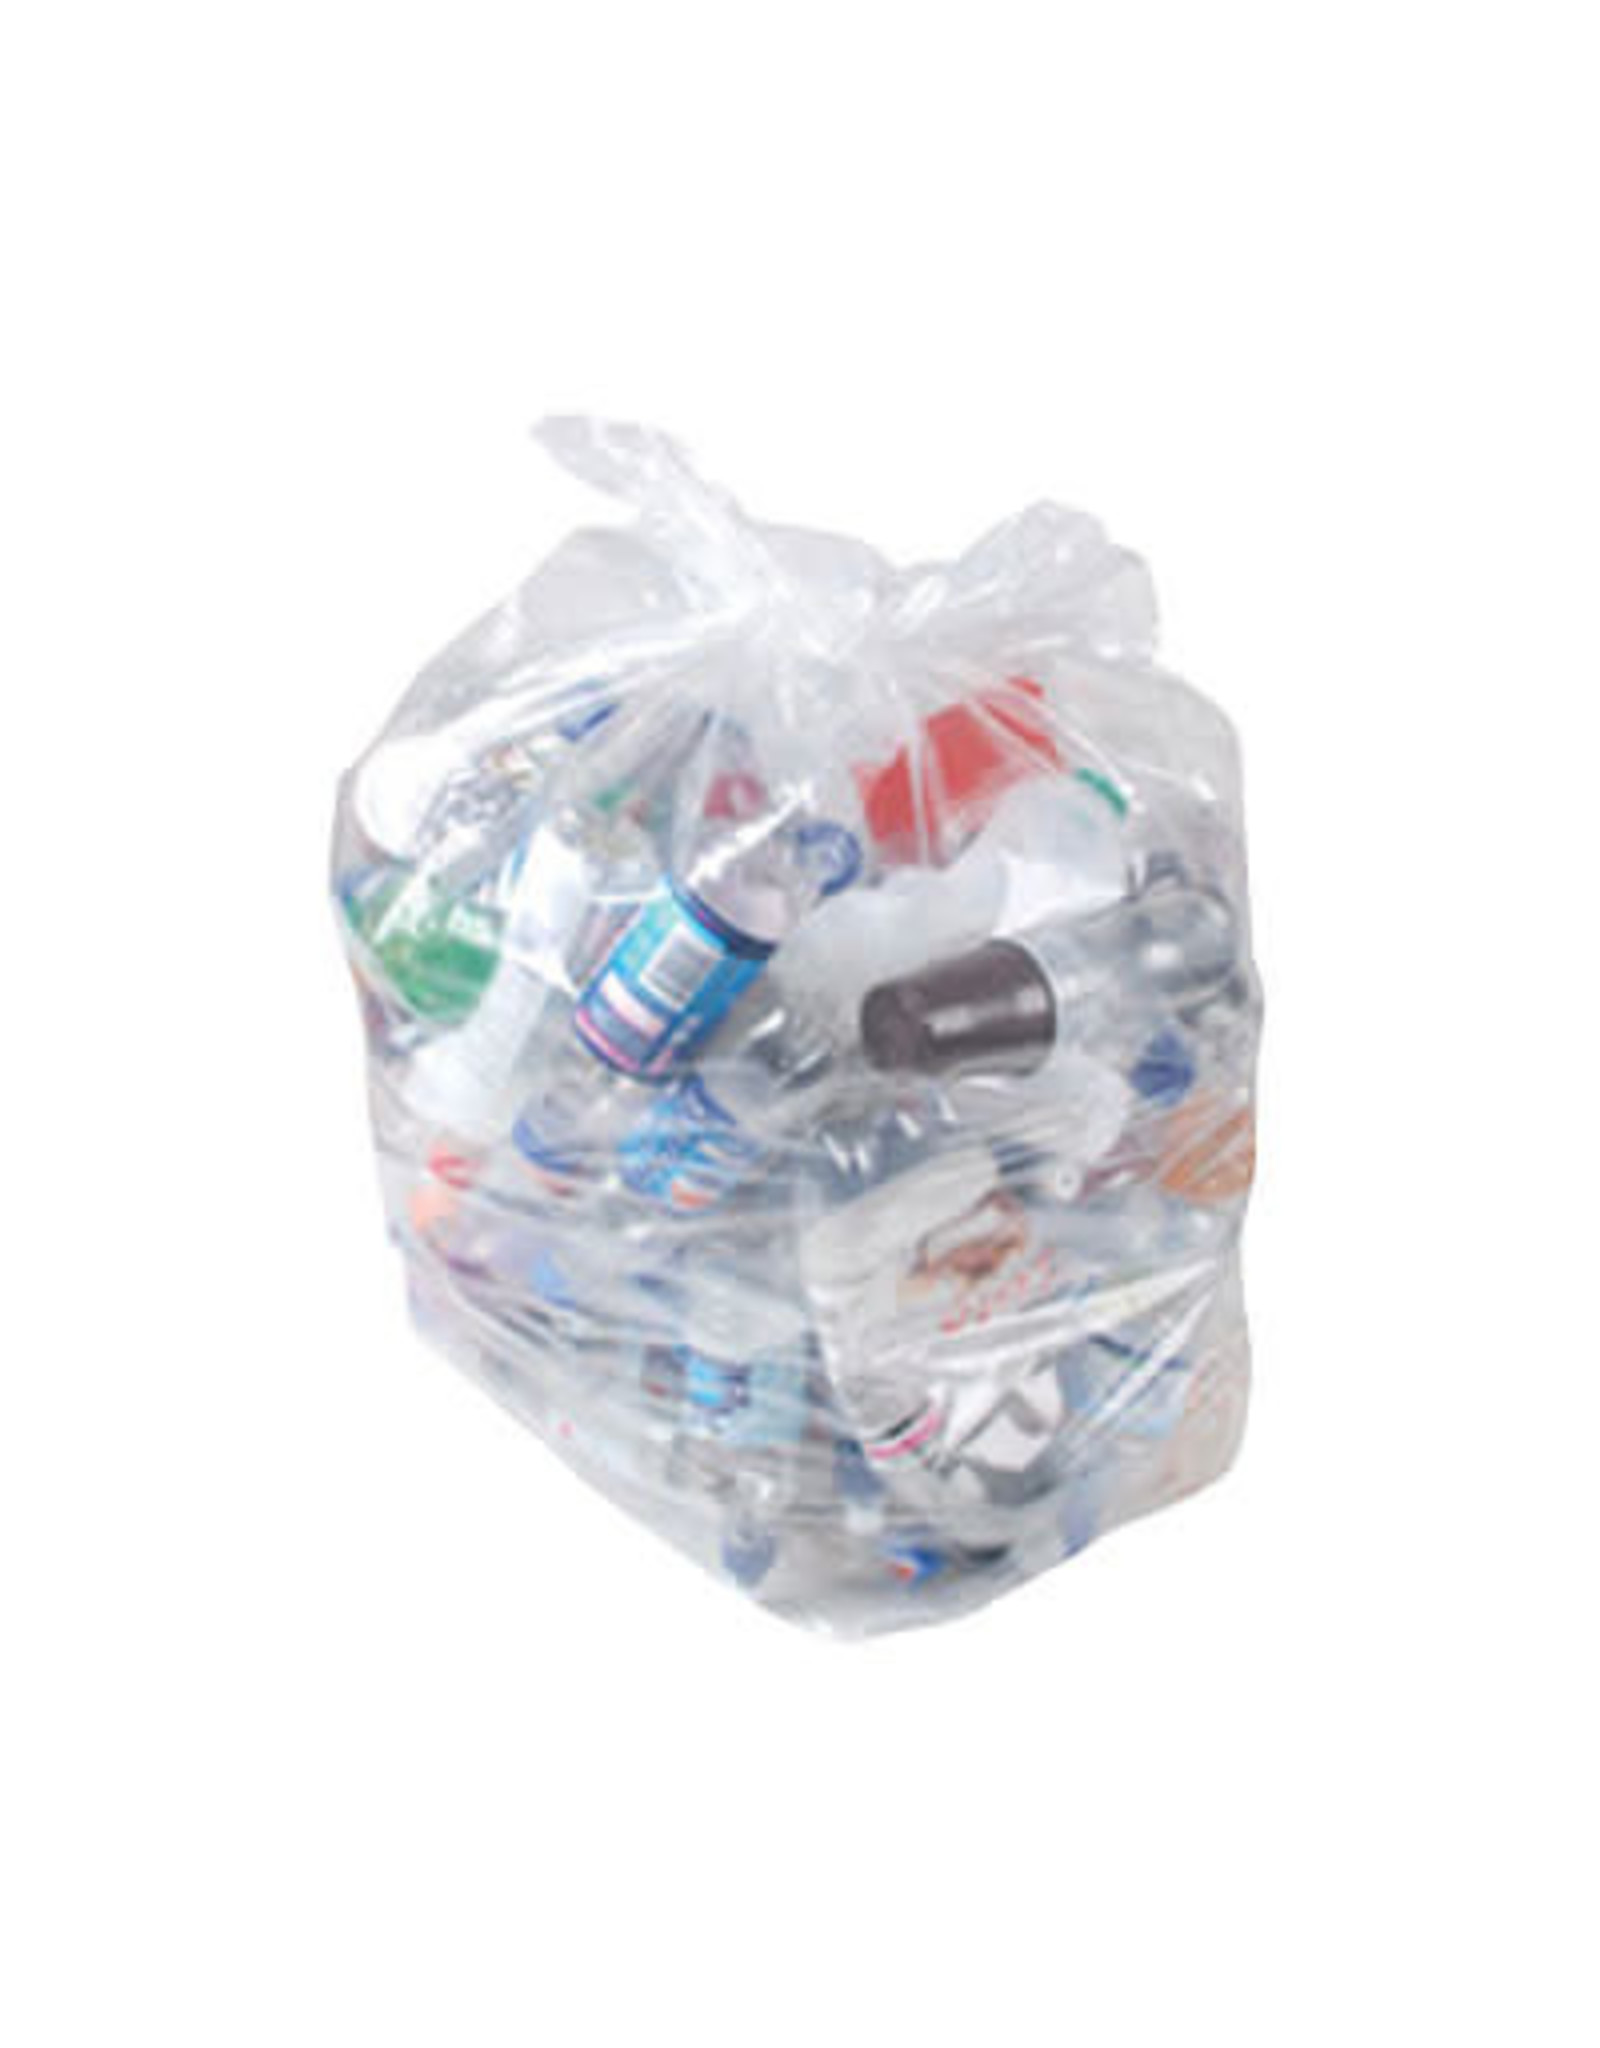 Proven 35 x 50 Strong Clear Garbage Bags (125/Box)